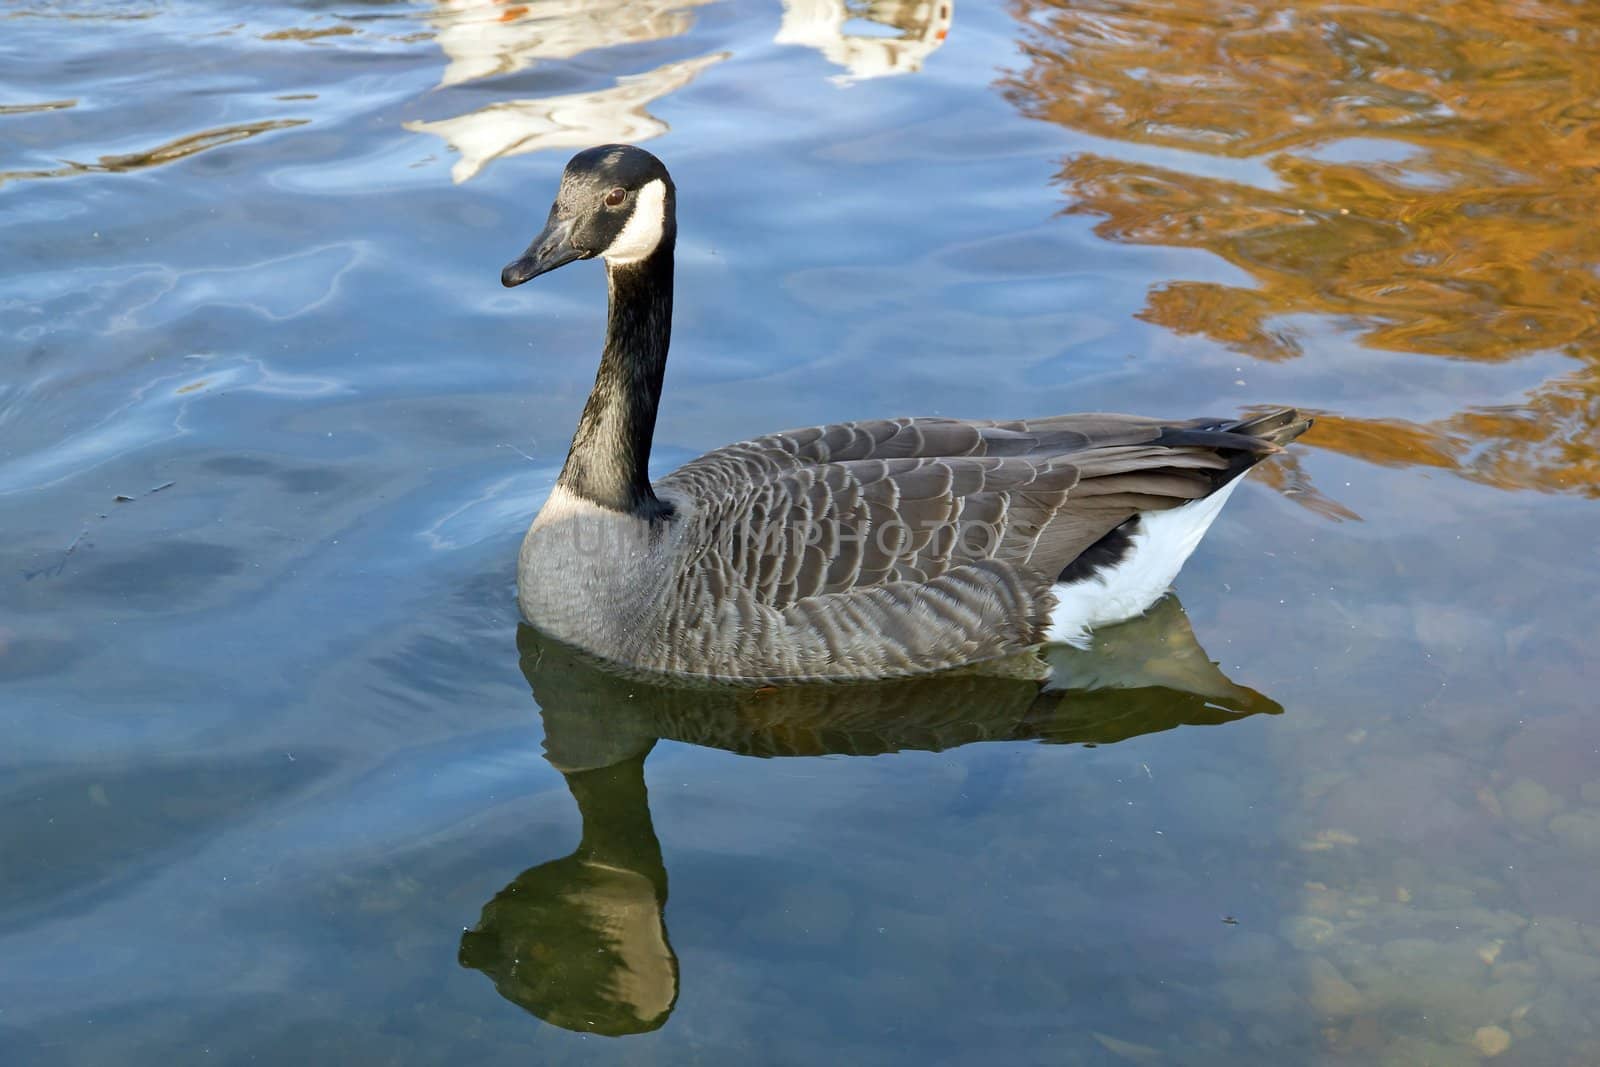 Canada goose gliding on the water